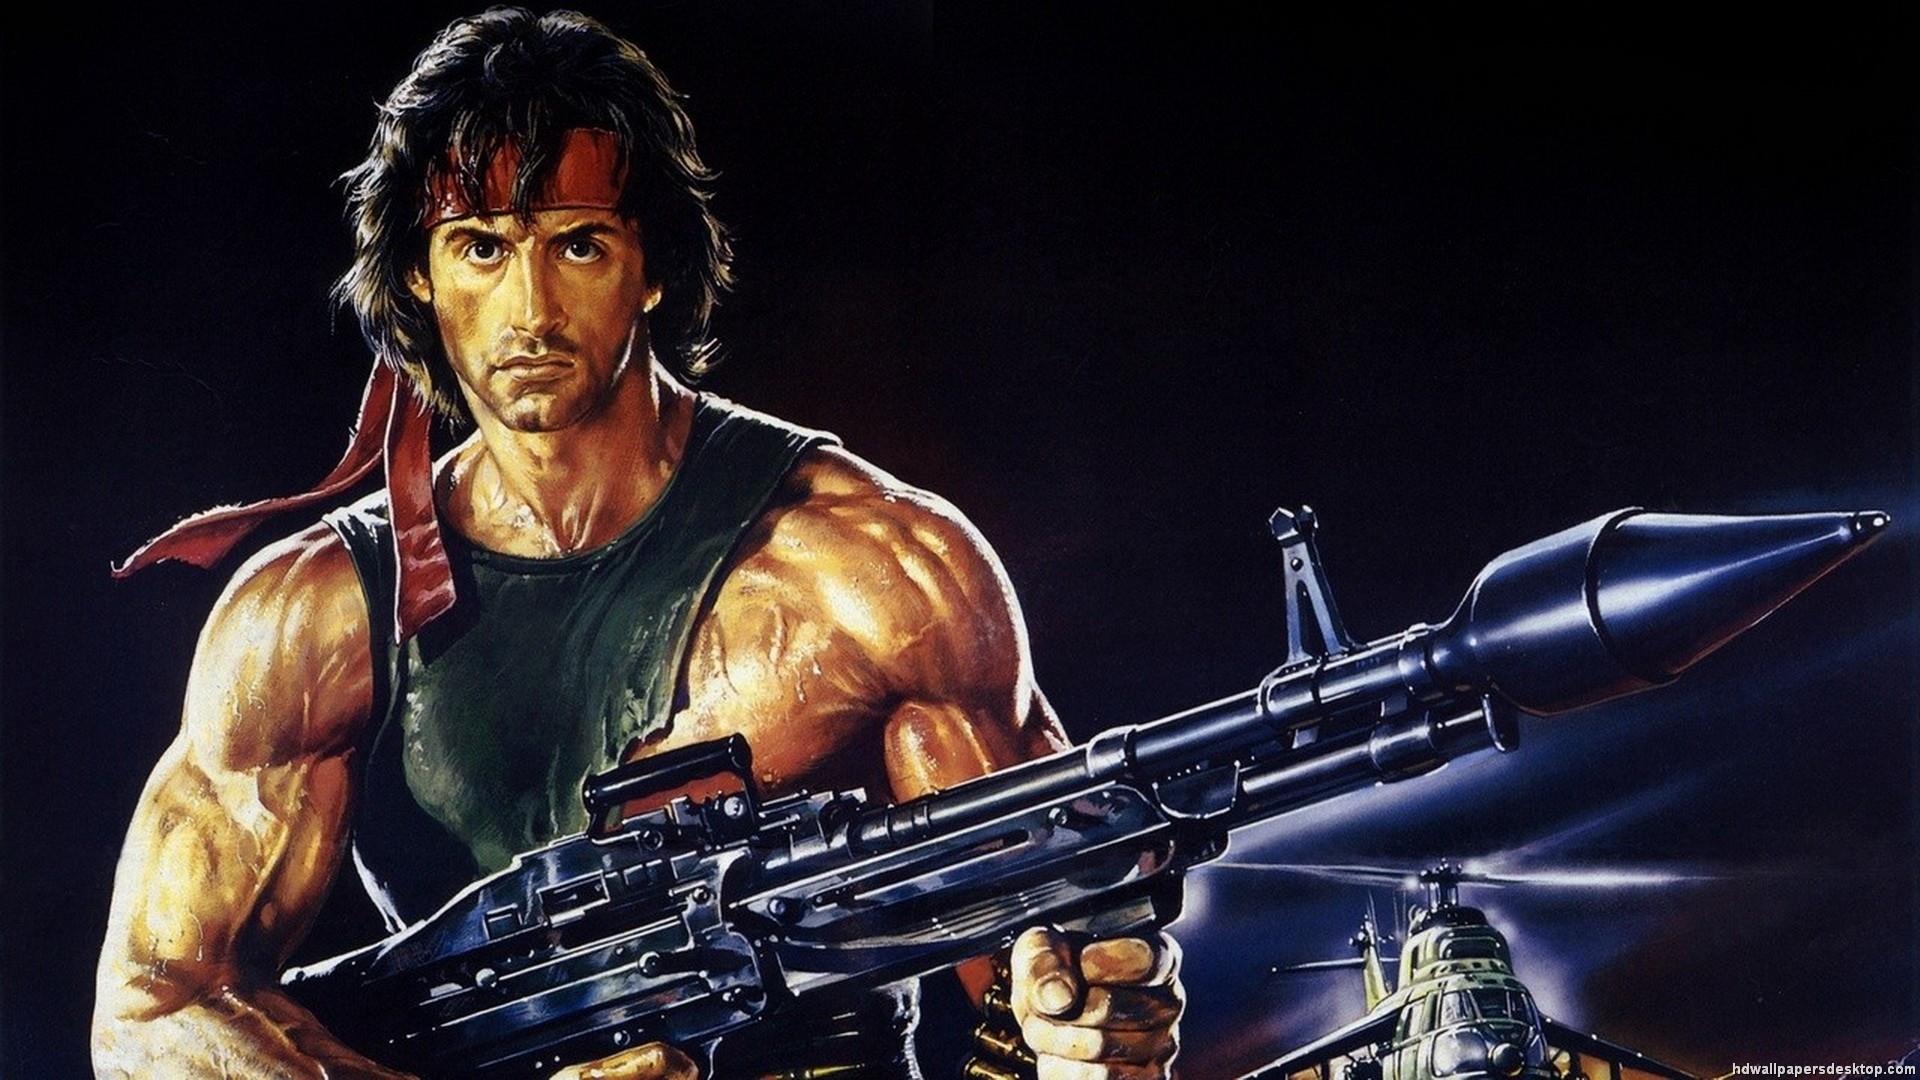 1920x1080 Rambo HD Wallpapers Free Desktop Images And Photos 1920Ã1080 Rambo .